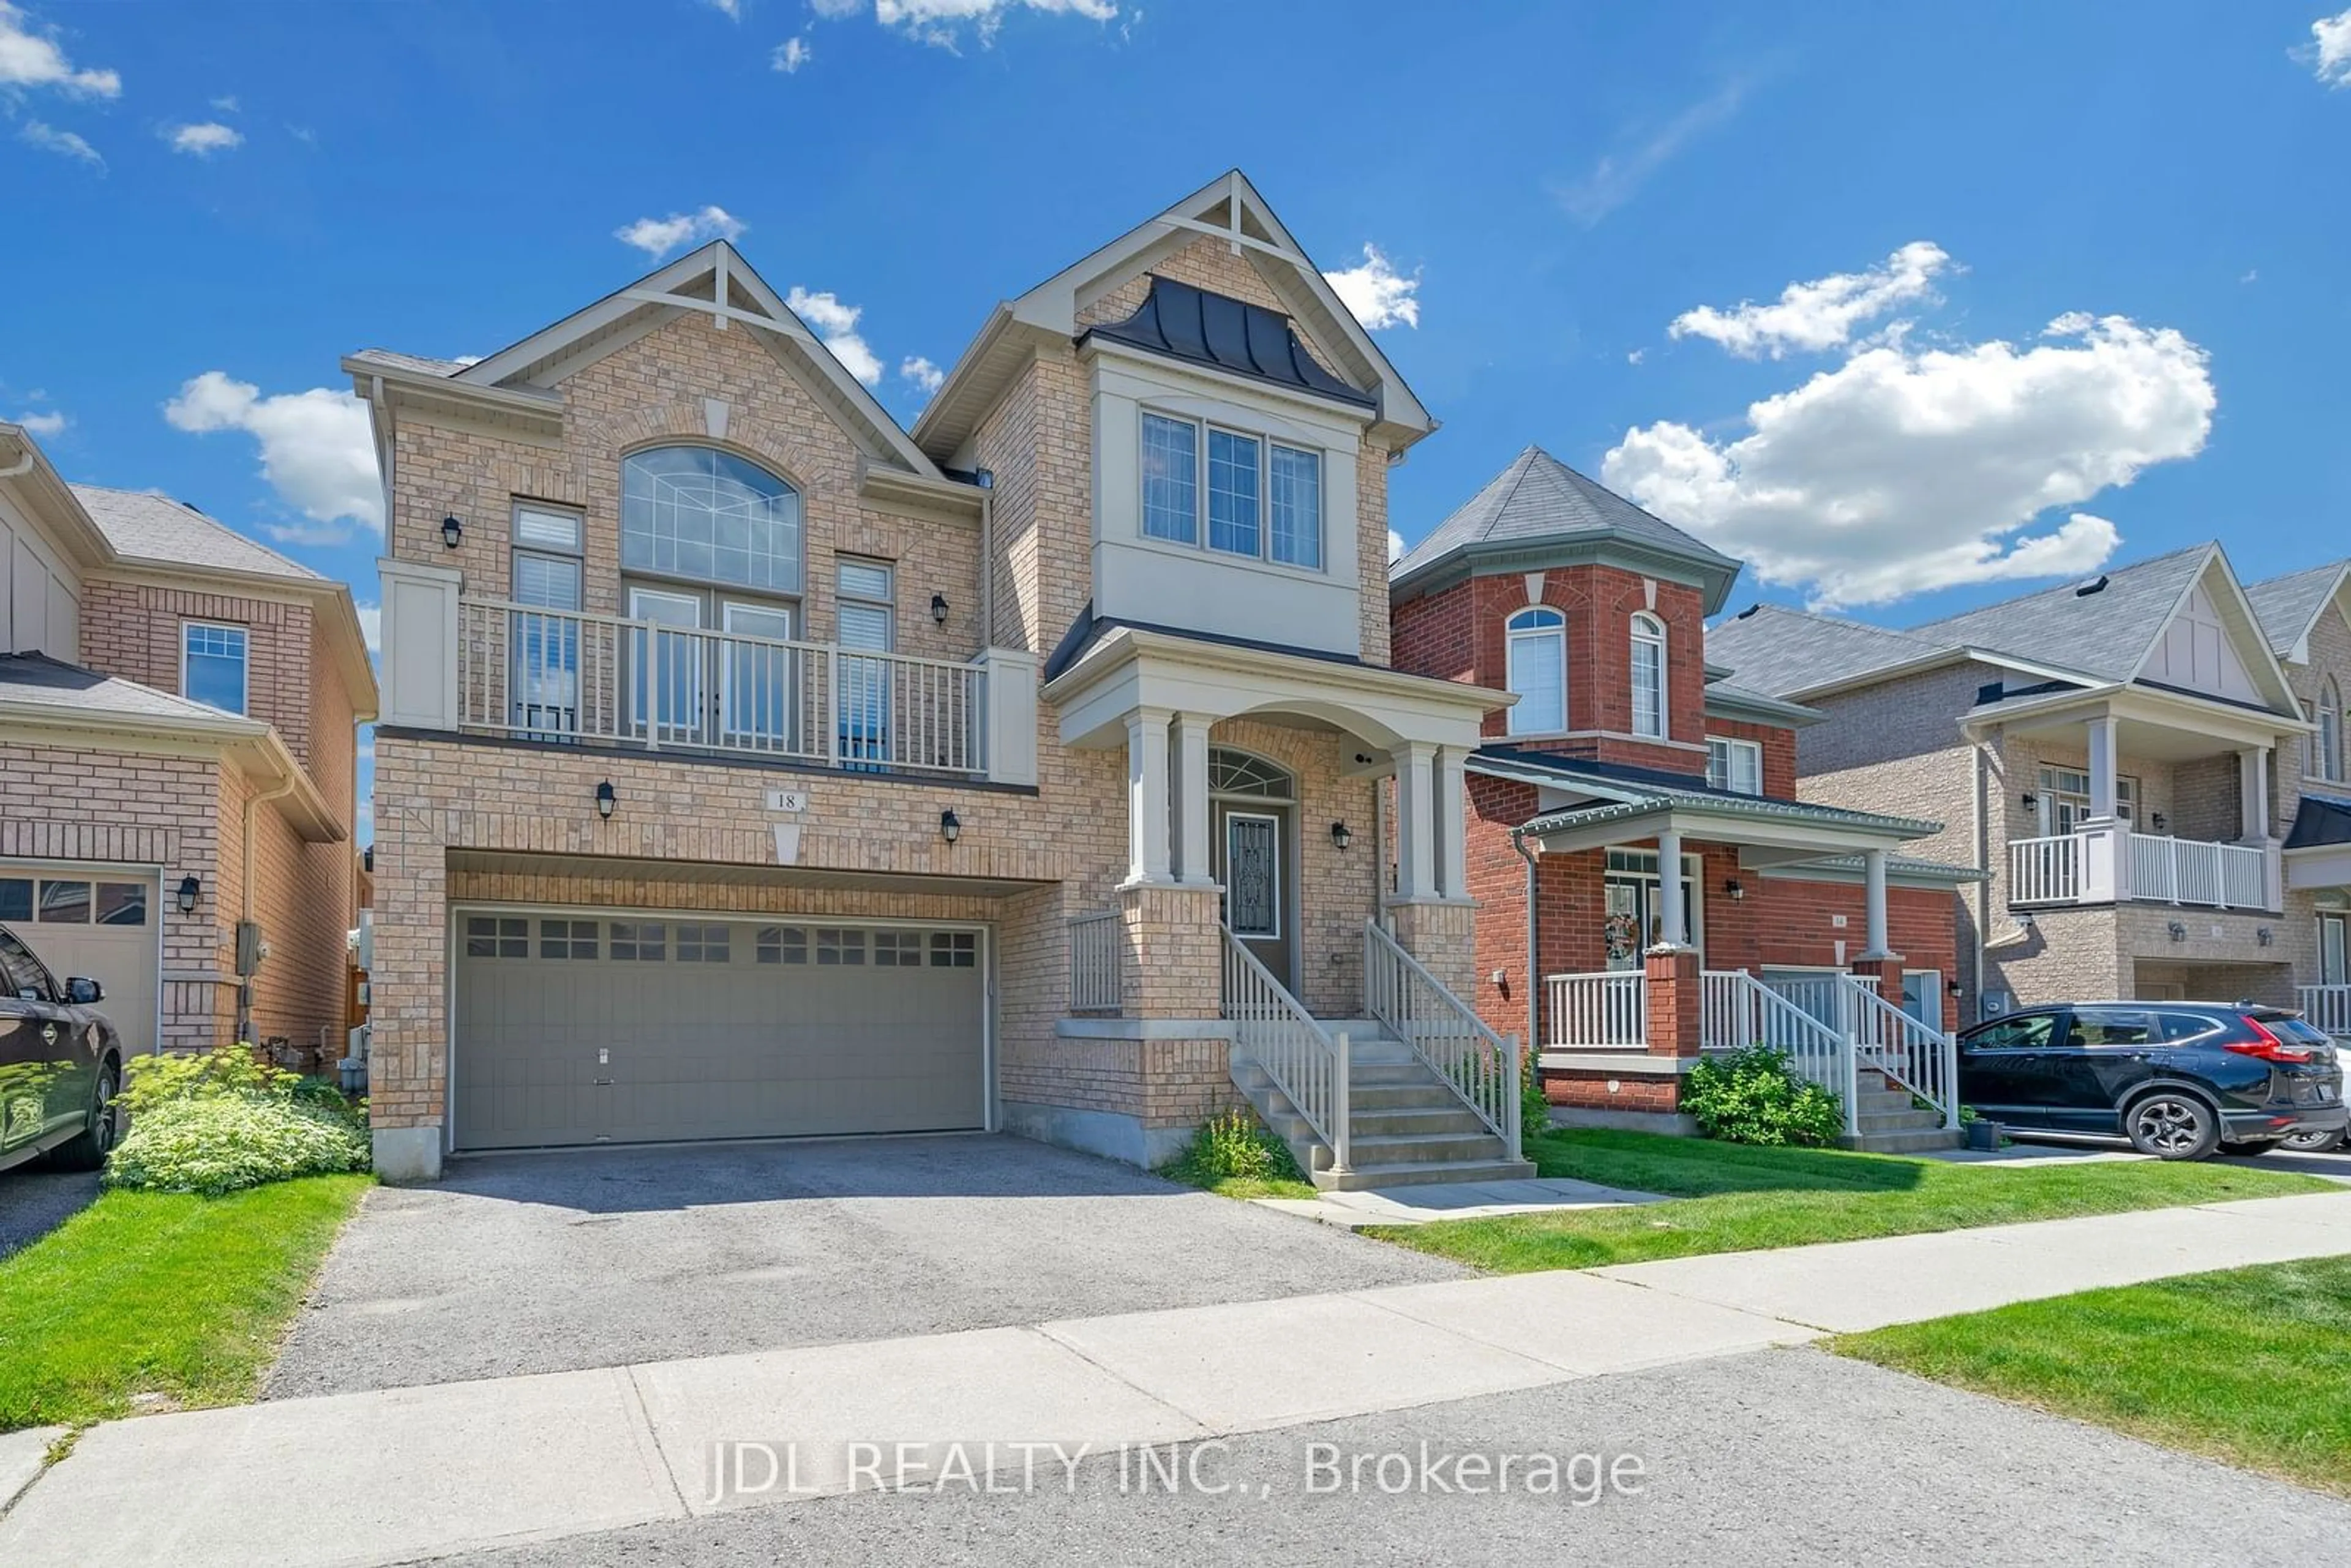 Home with brick exterior material for 18 Kellington Tr, Whitchurch-Stouffville Ontario L4A 1X5